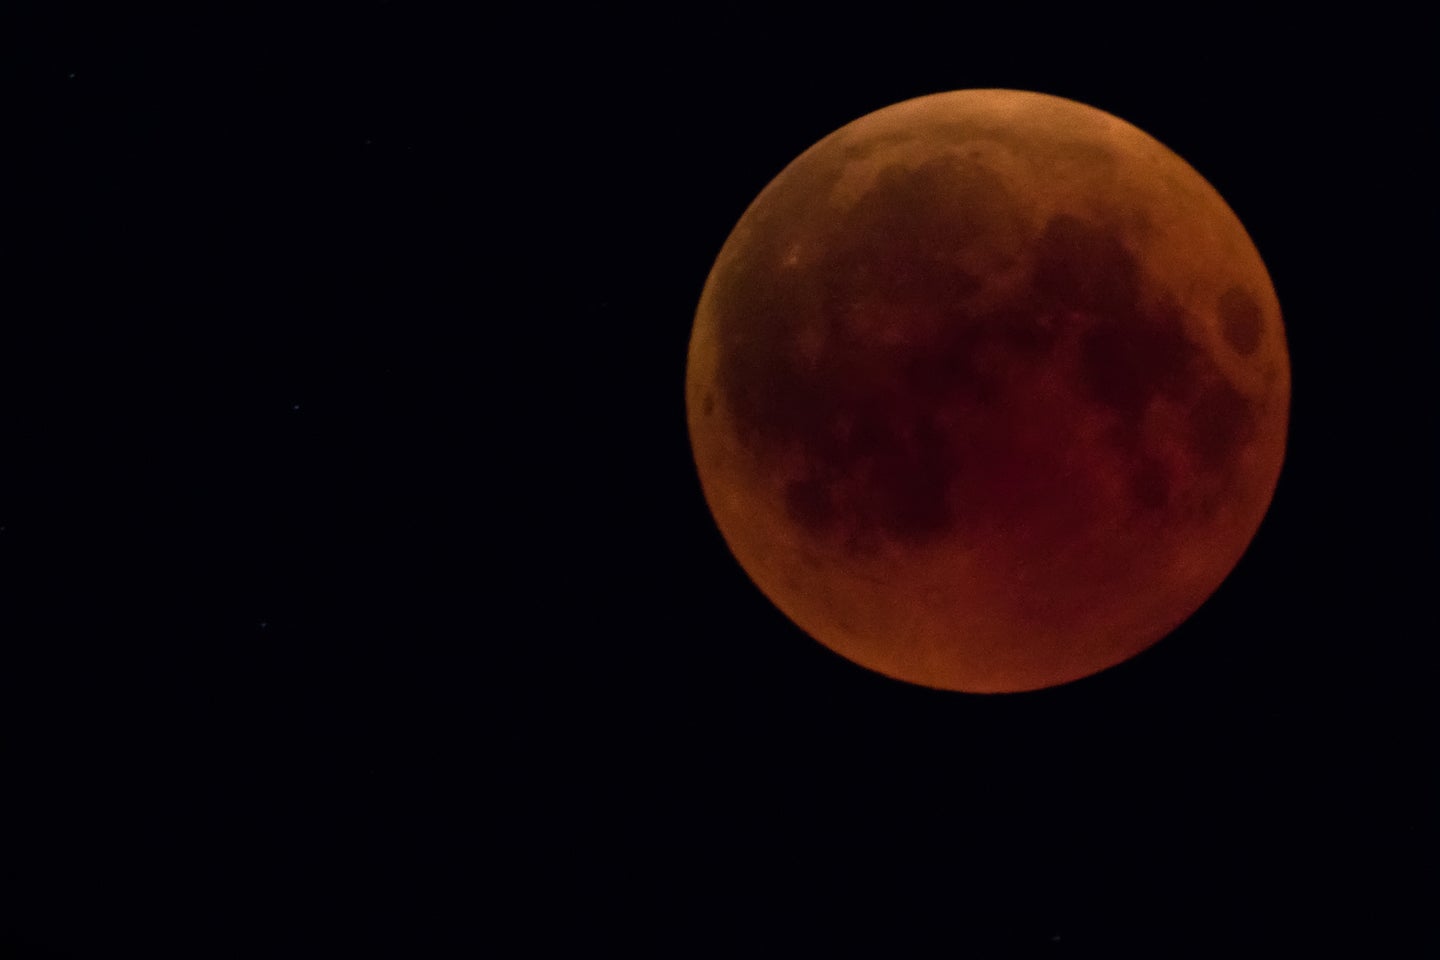 a moon with a red tint due to a lunar eclipse